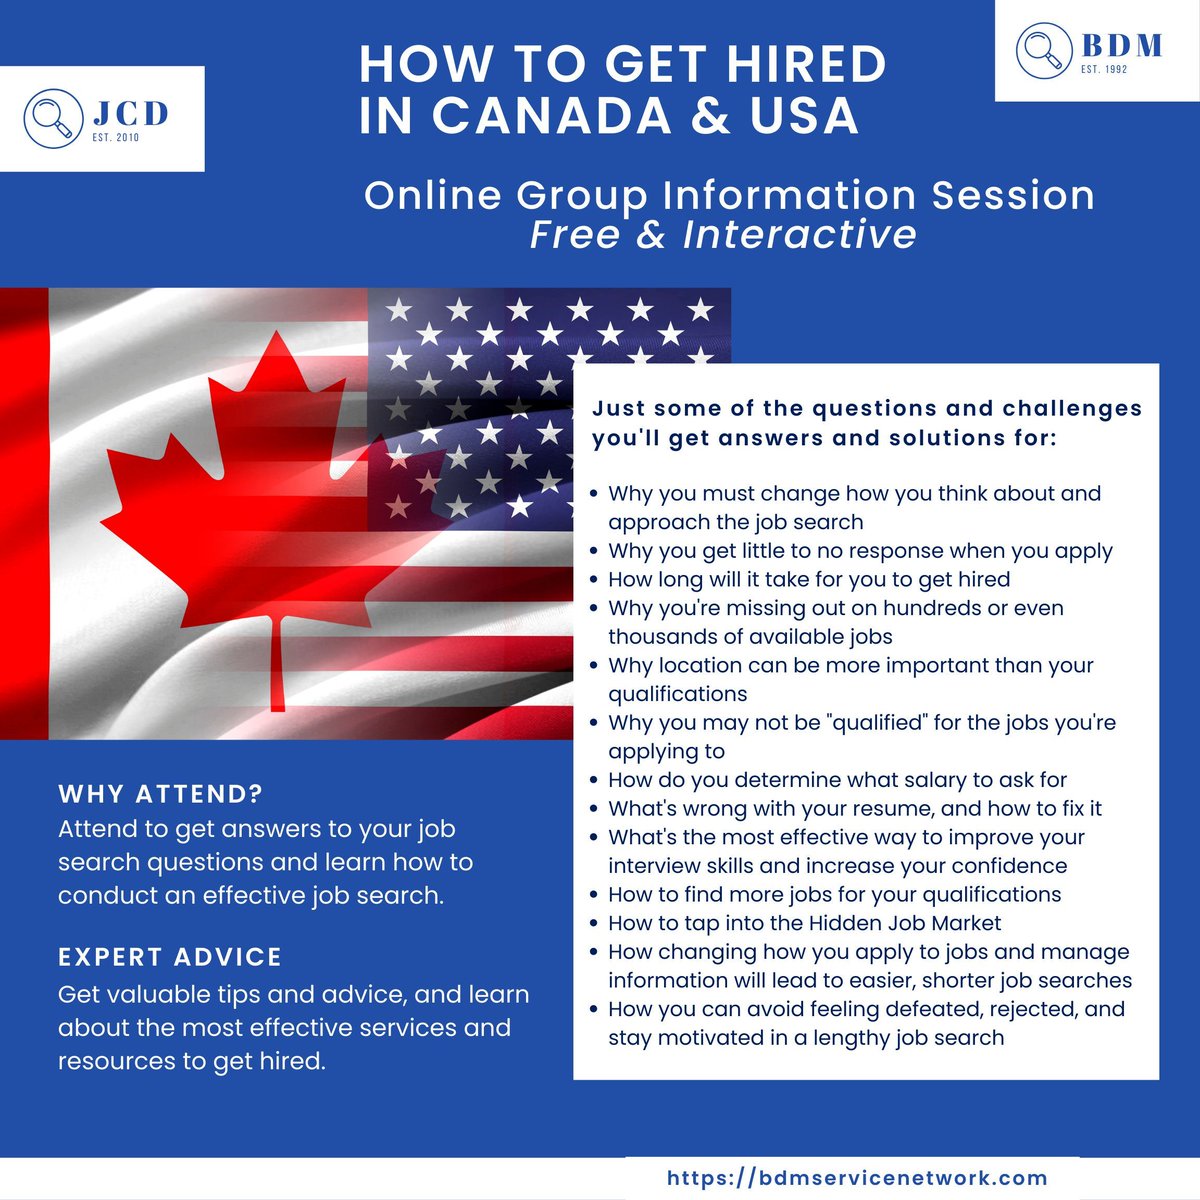 Learn everything you need to Get Hired and achieve career success in Canada and USA. FREE. Book Now! buff.ly/3HP5toZ #jobseekers #jobs #gethired #jobsearch #jobhunt #jobhunting #canada #usa #canadajobs #usajobs #canadajobsearch #usajobsearch #jobsincanada #jobsinusa